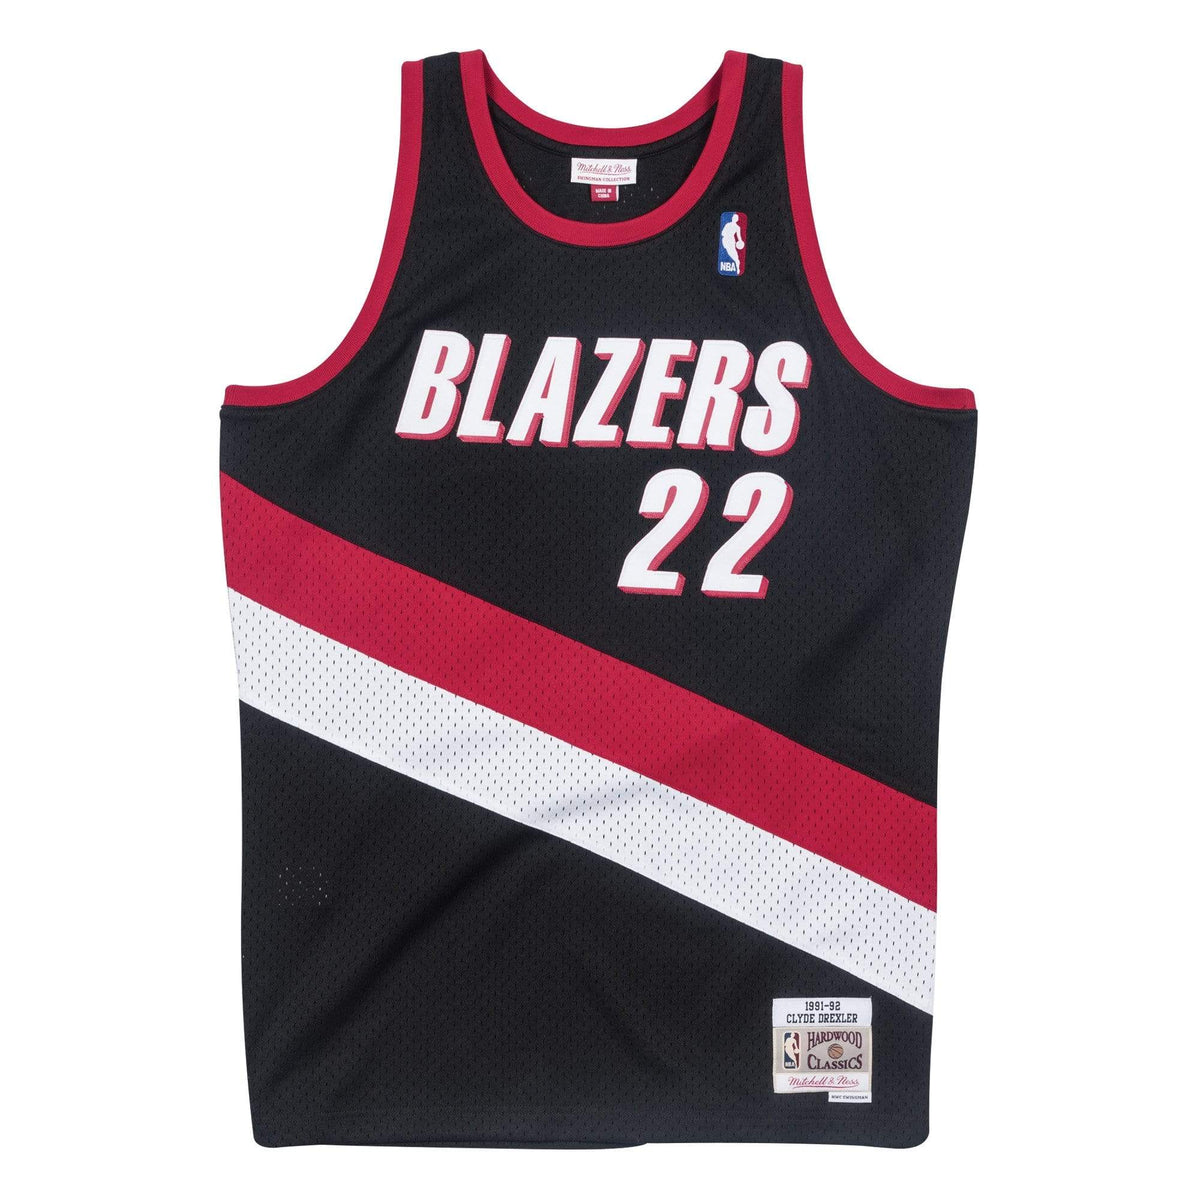 clyde drexler mitchell and ness